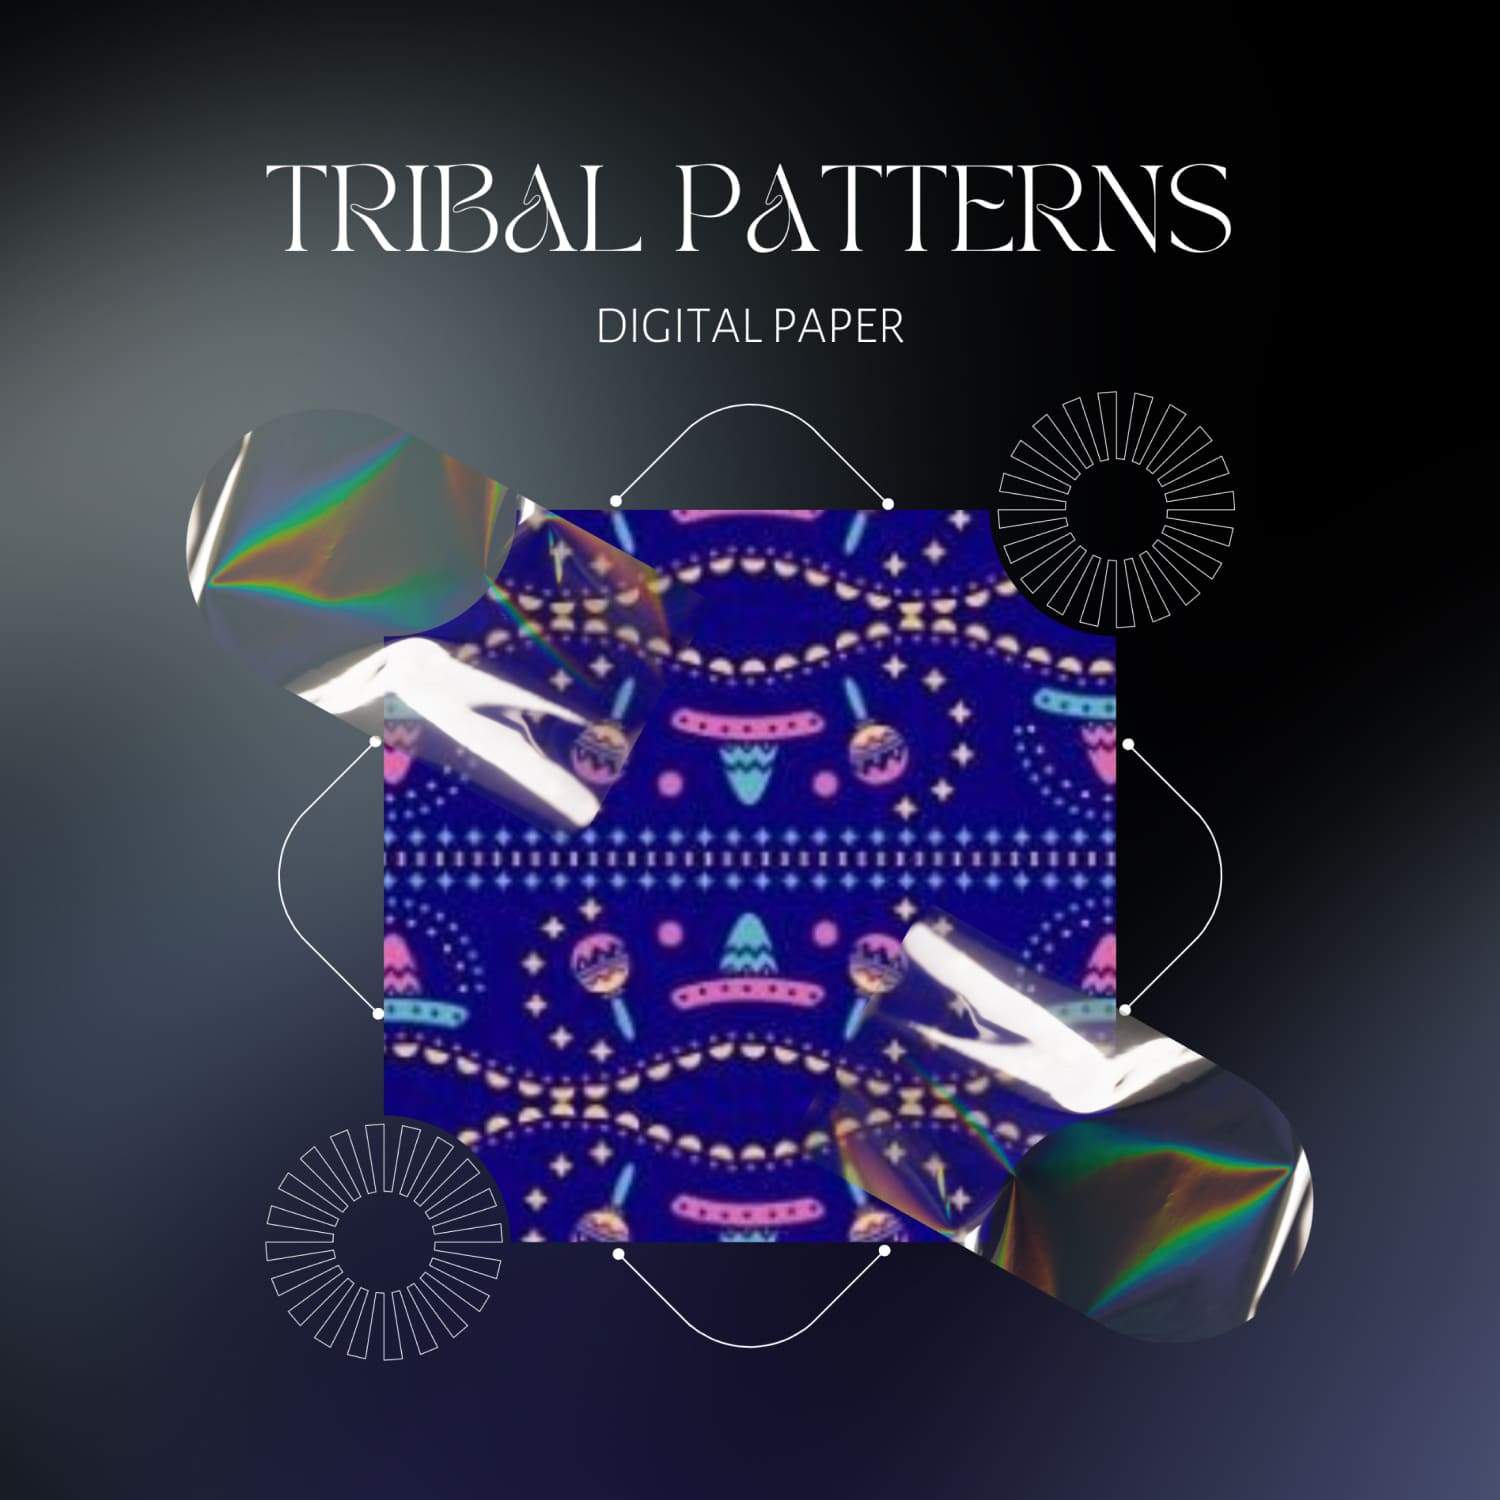 Image of an enchanting tribal pattern in blue.